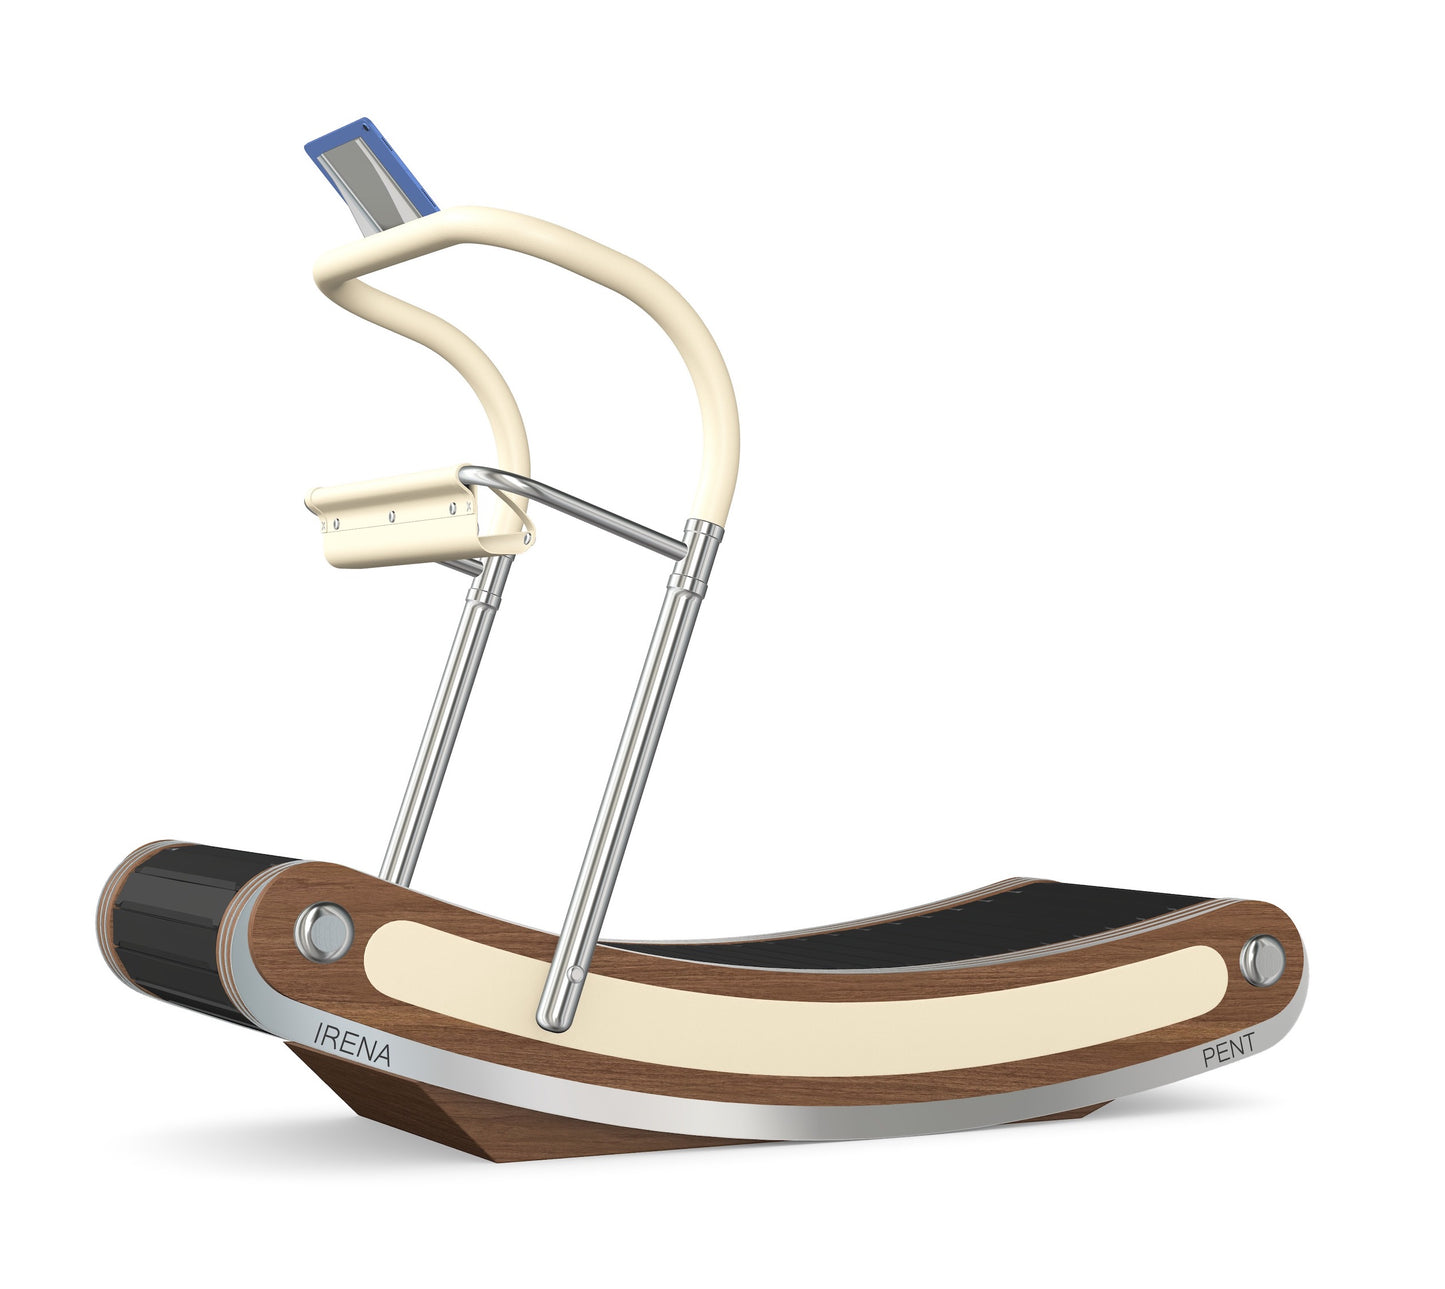 Sleek, premium curved manual treadmill - PENT IRENA, made with stainless steel, natural leather, and natural wood.